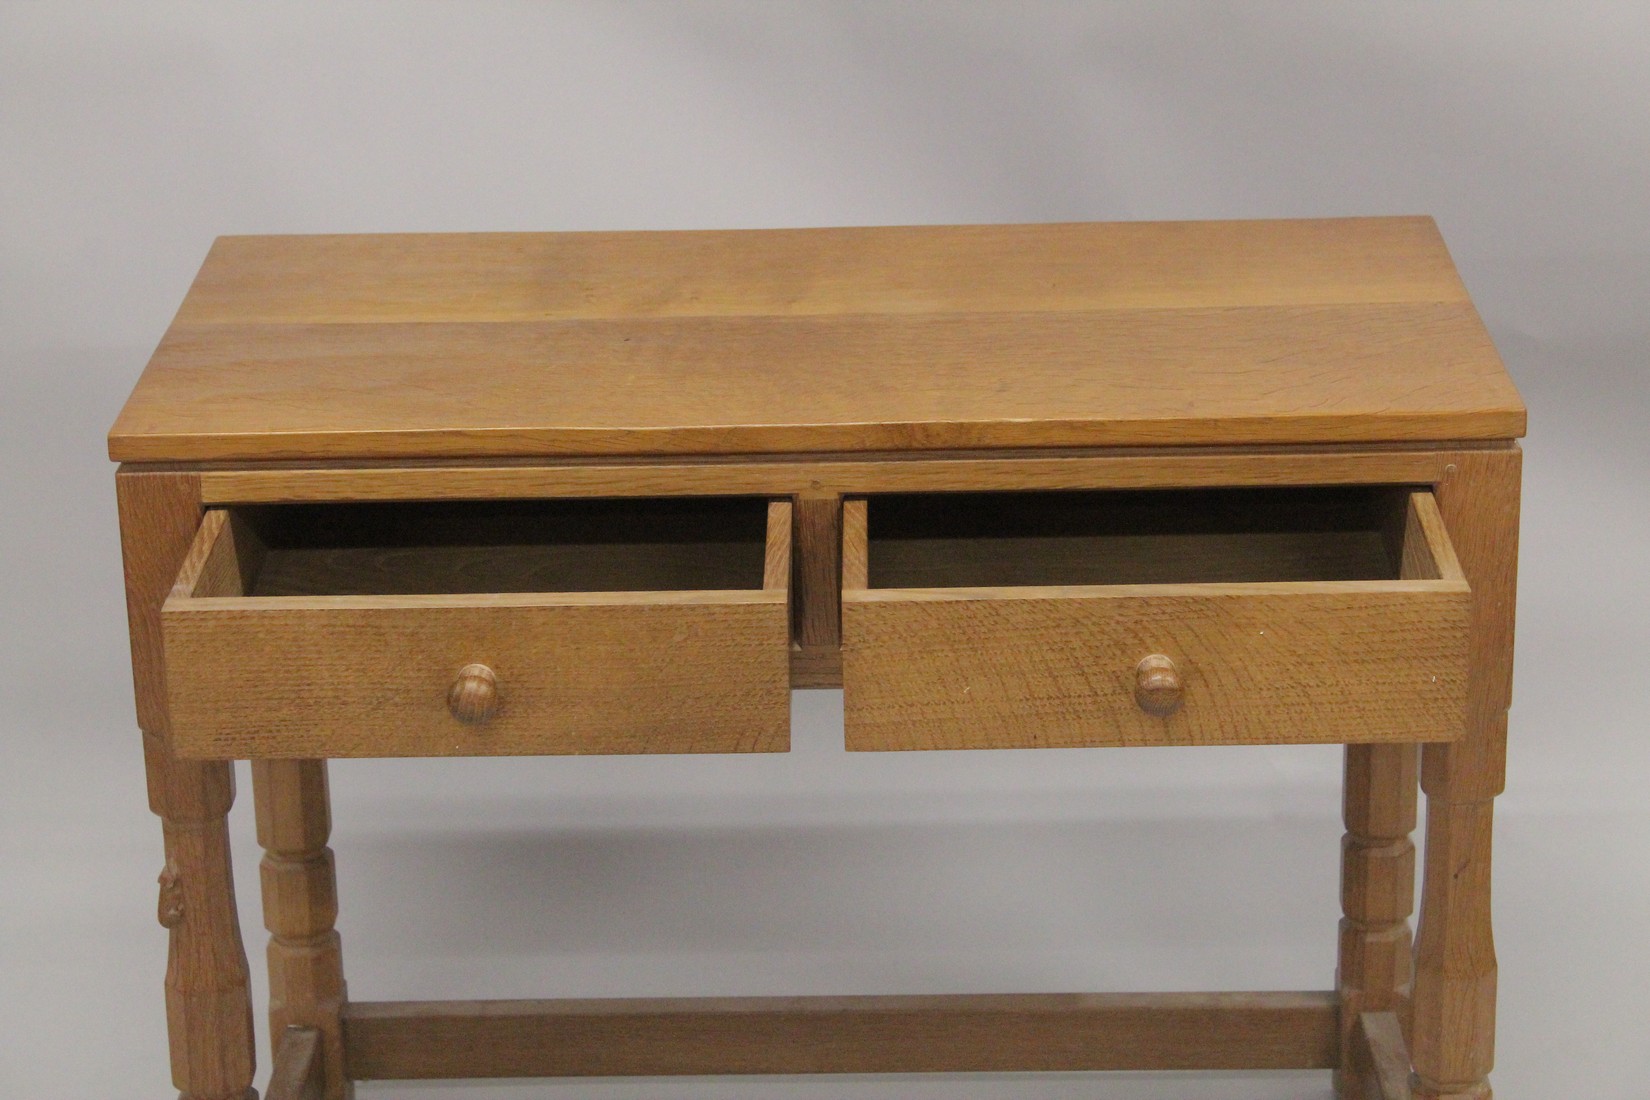 ROBERT "MOUSEMAN" THOMPSON. AN OAK SIDE TABLE with an adzed rectangular top, two frieze drawers with - Image 3 of 5